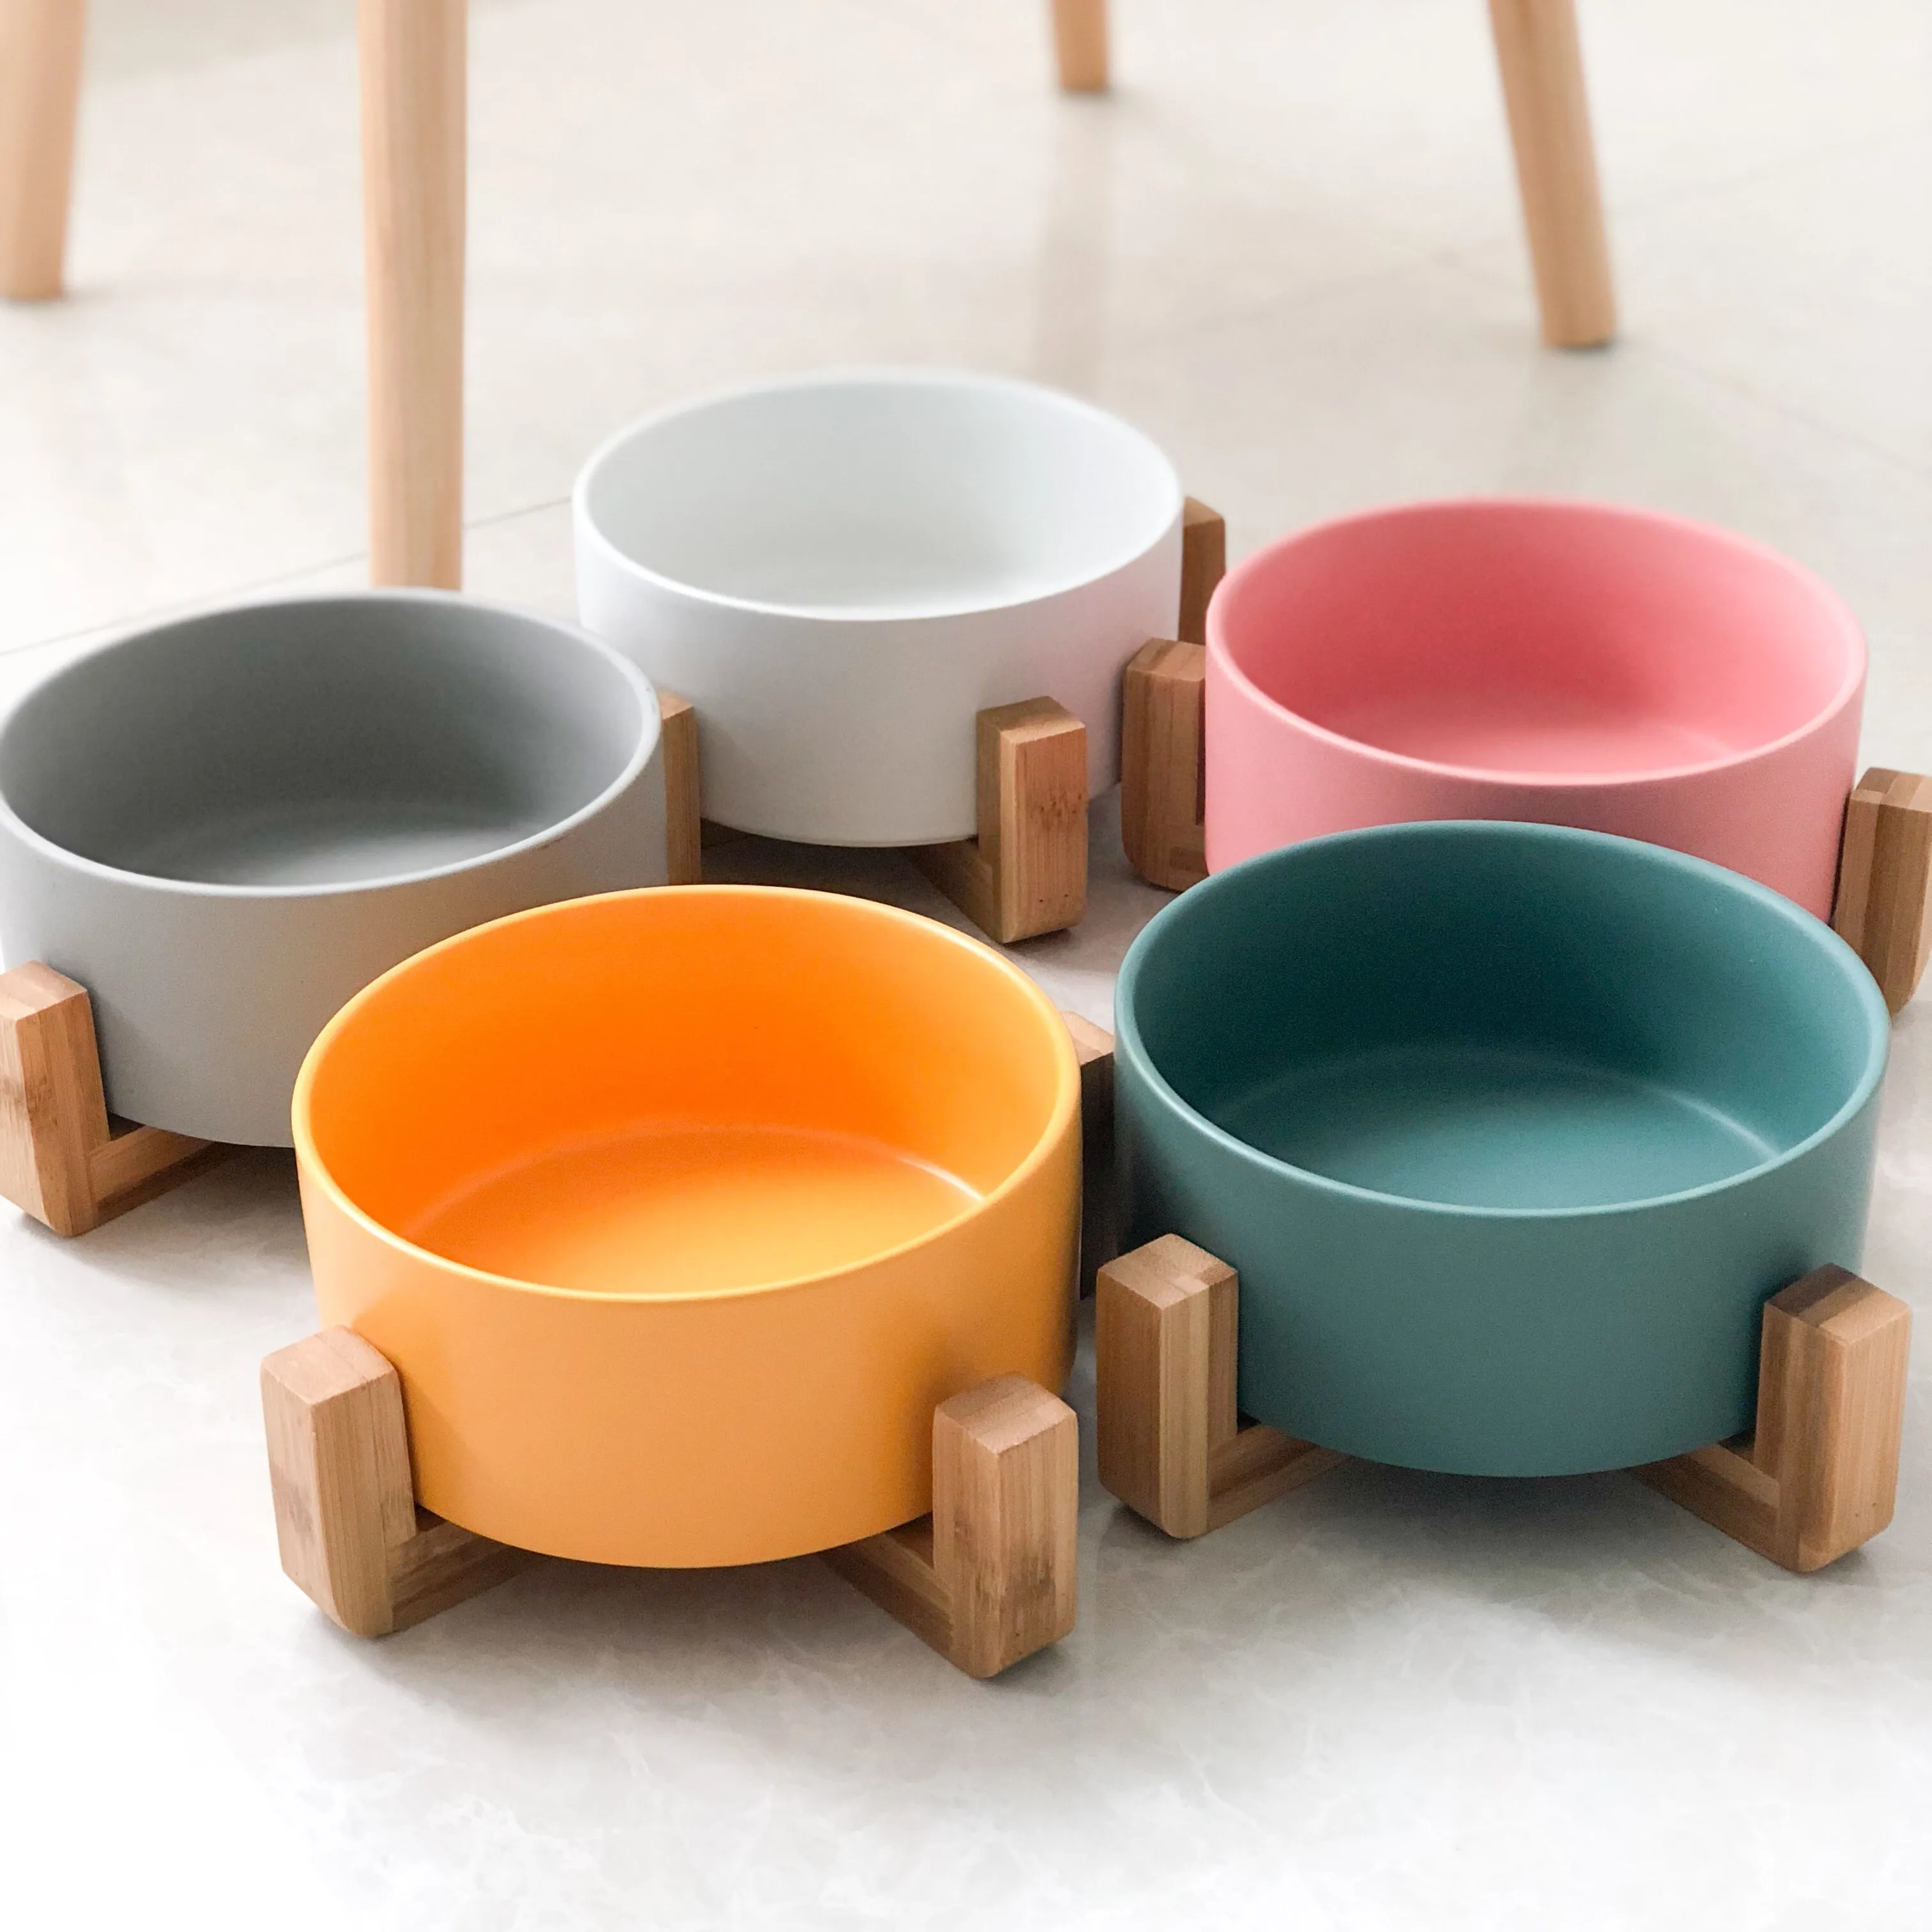 https://ae01.alicdn.com/kf/H4350ec2d6cd04a9887c7605e530bf30dd/Ceramic-Elevated-Raised-Cat-Bowl-with-Wood-Stand-No-Spill-Pet-Food-Water-Feeder-Cats-Small.jpg